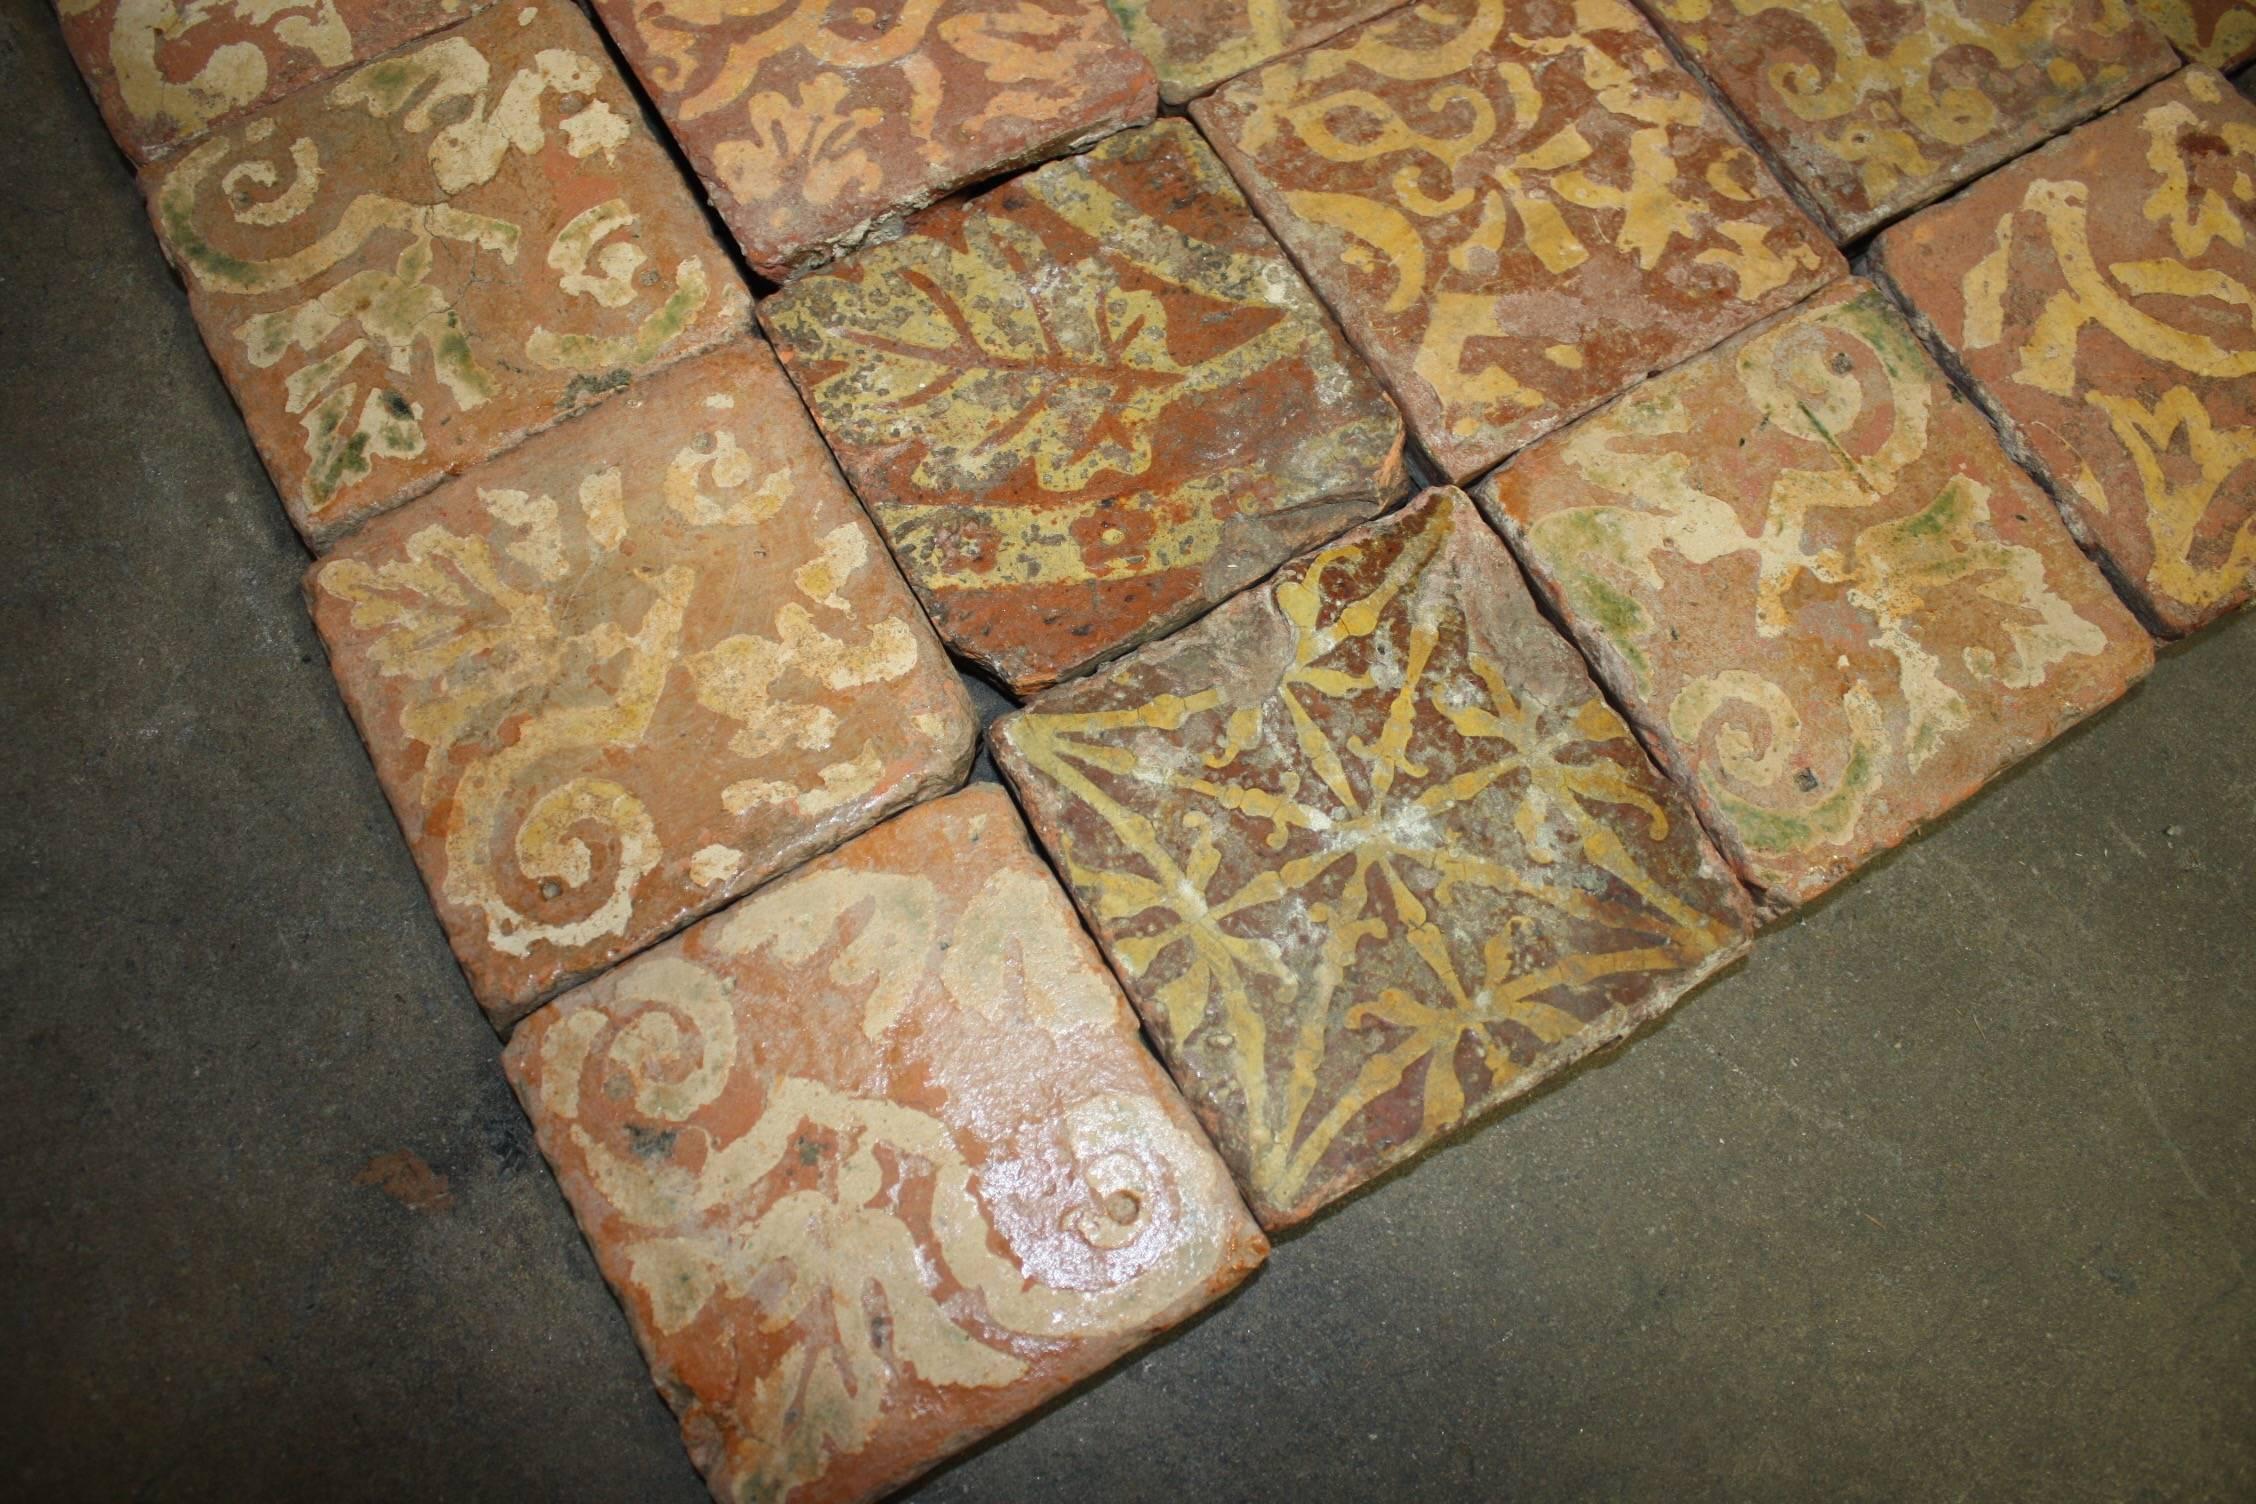 Hand-Painted 16th Century French Terracotta Tiles